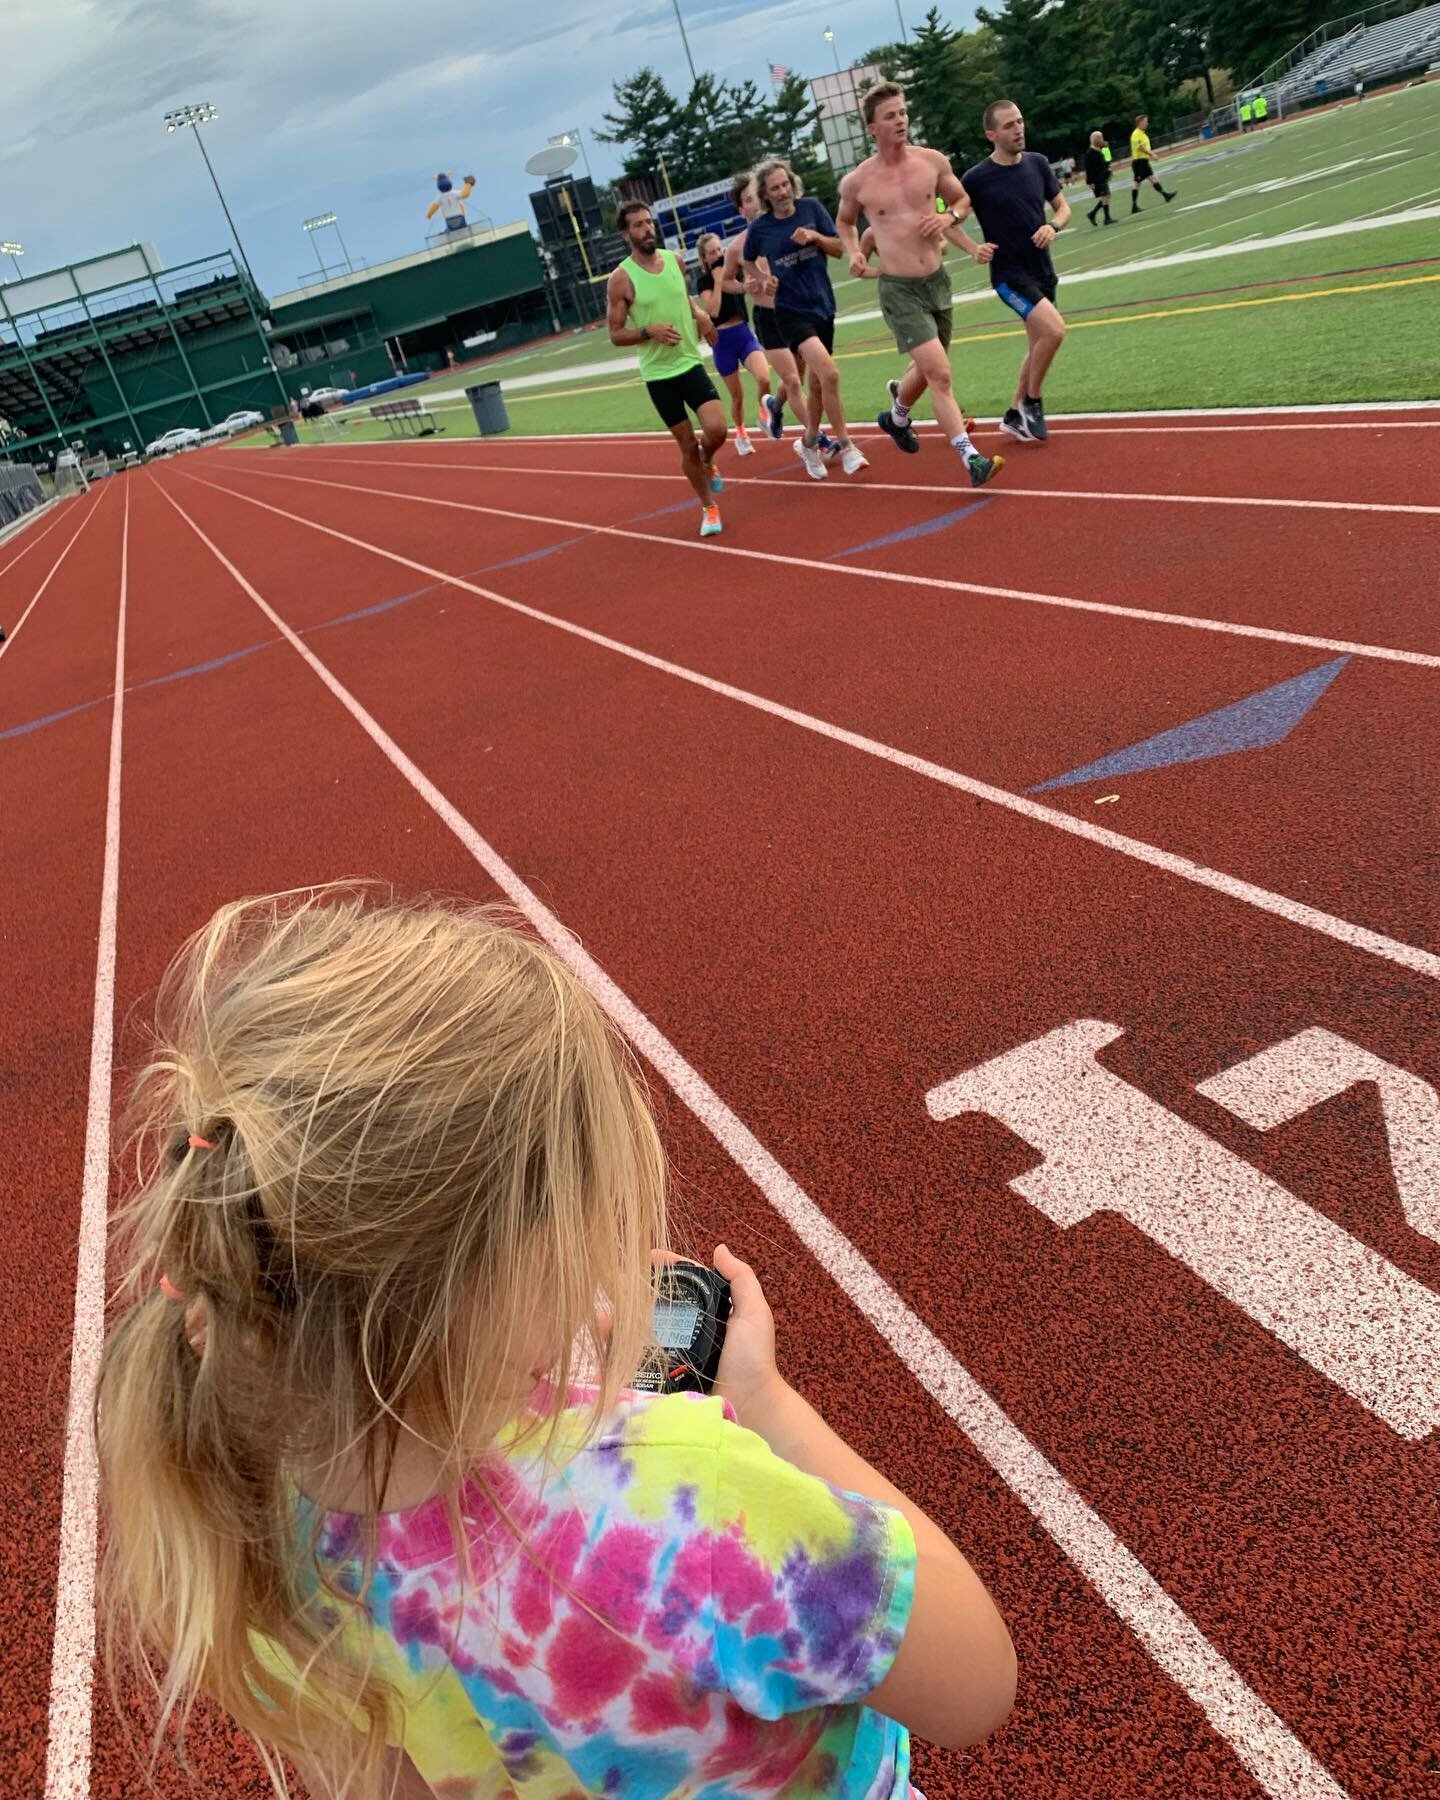 Last night we had a special guest, Coach Charlotte, to keep us all in line 😤 Thanks for bringing your little person to practice @jgrant0602 💕 We may have to order some youth singlets soon too!